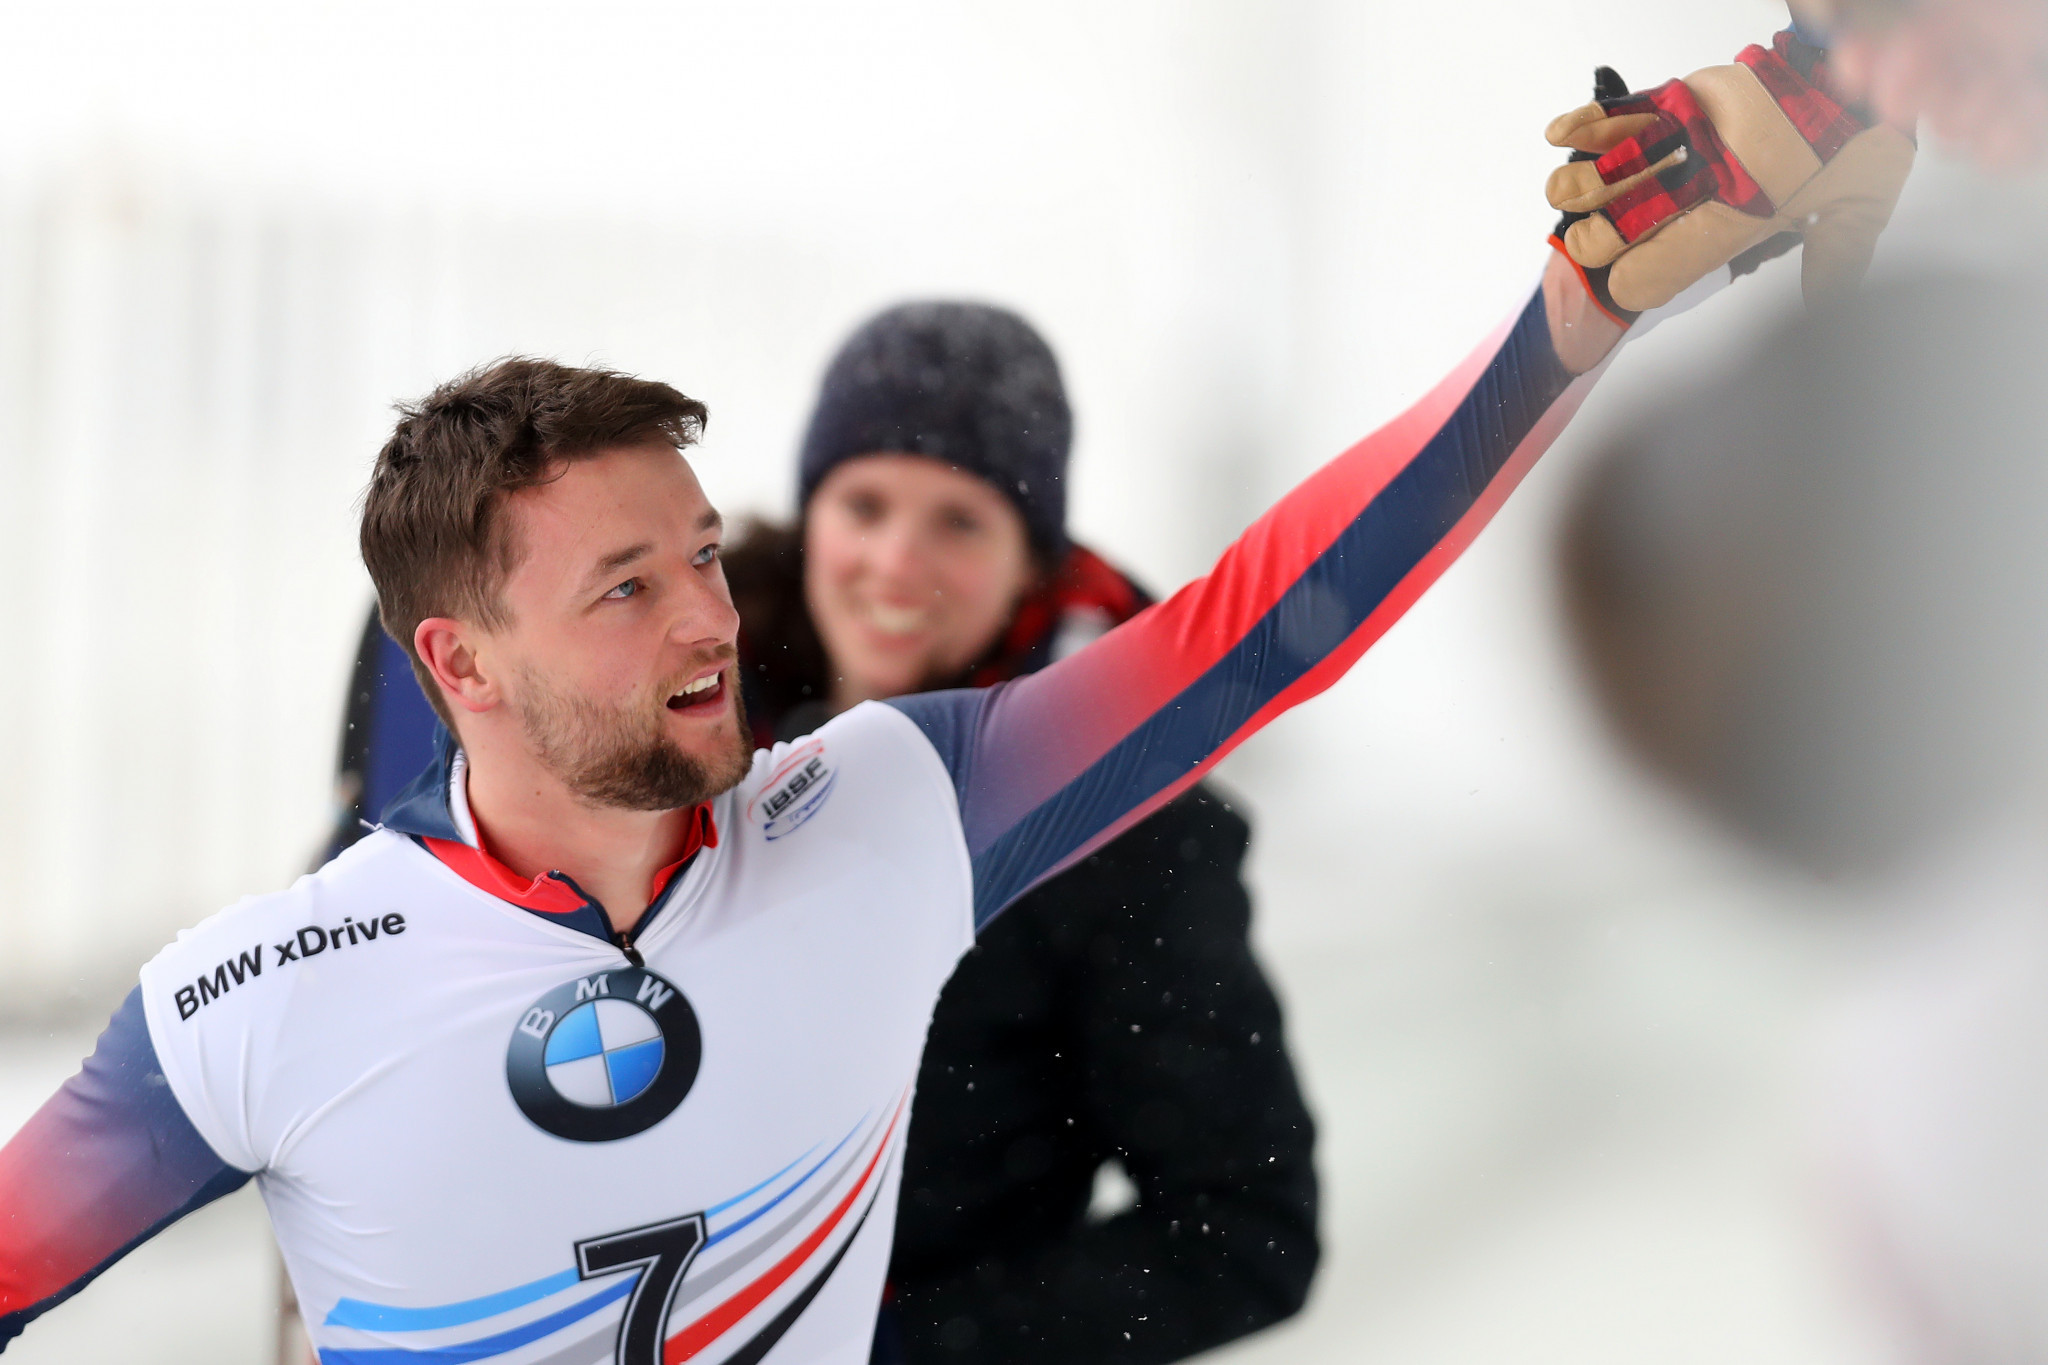 Britain's Marcus Wyatt won the election for the men's skeleton position ©Getty Images